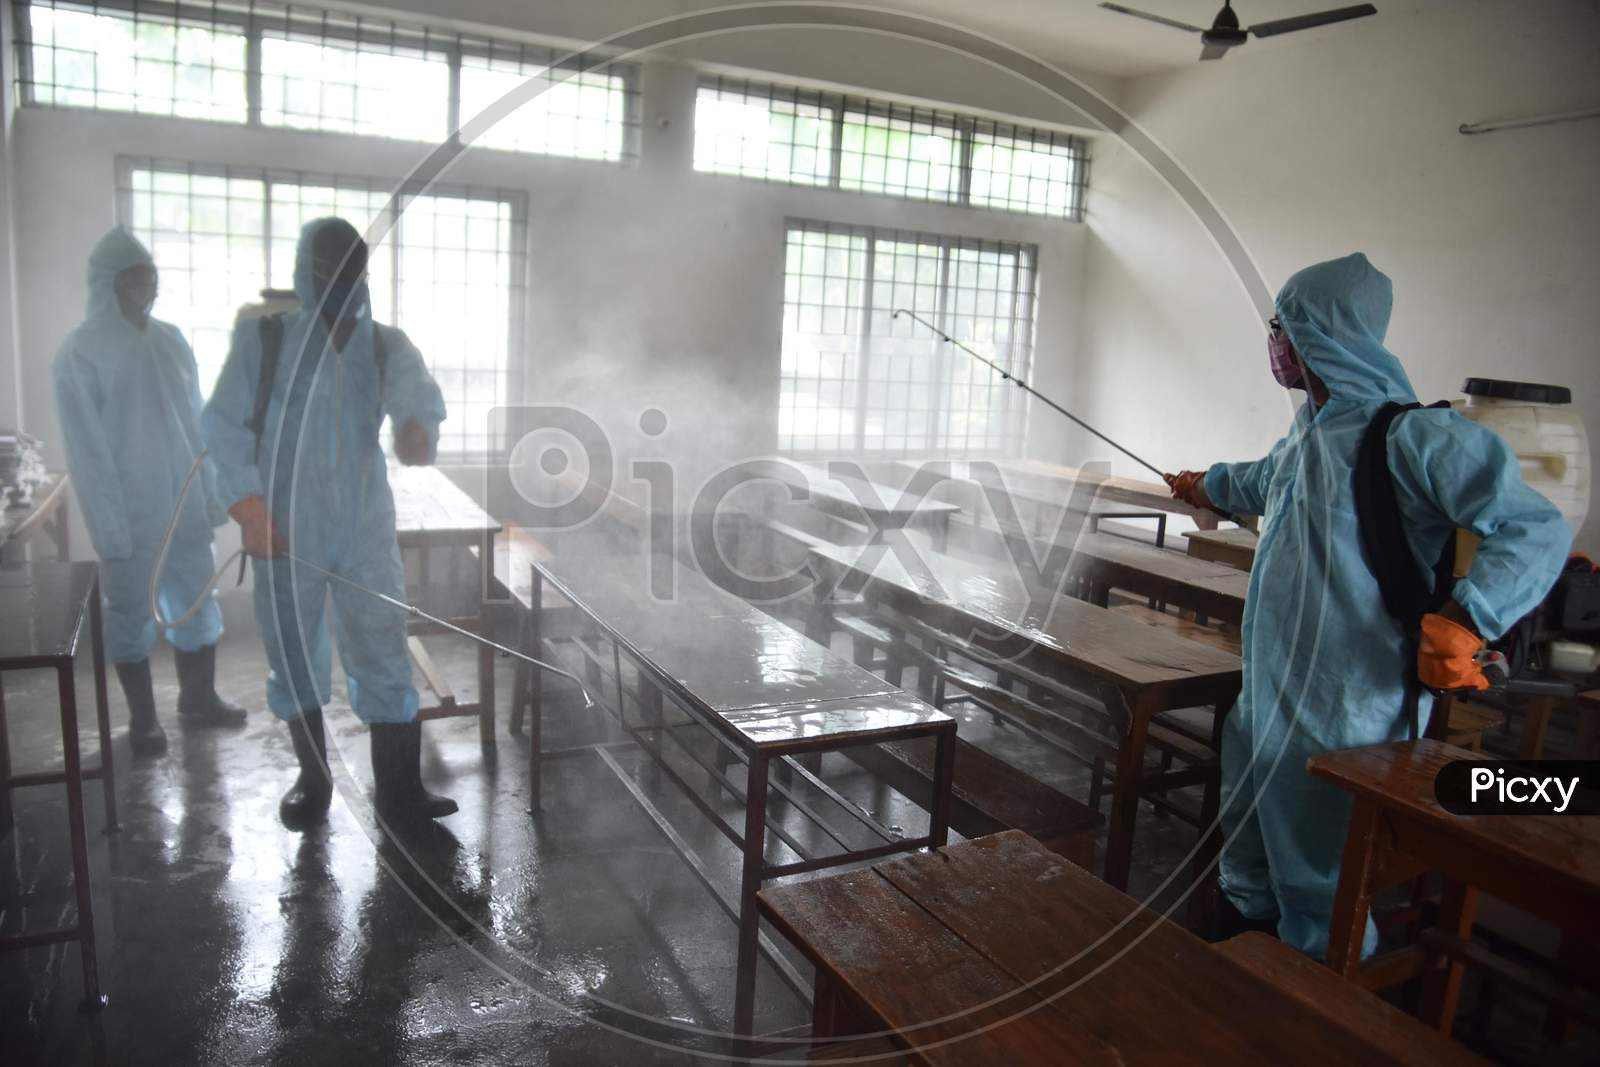 Municipal workers wearing personal protective equipment (PPE) spray disinfectant to sanitize a  school  to prevent the spread of the coronavirus disease (Covid-19) In Nagaon district of Assam on August 30,2020.